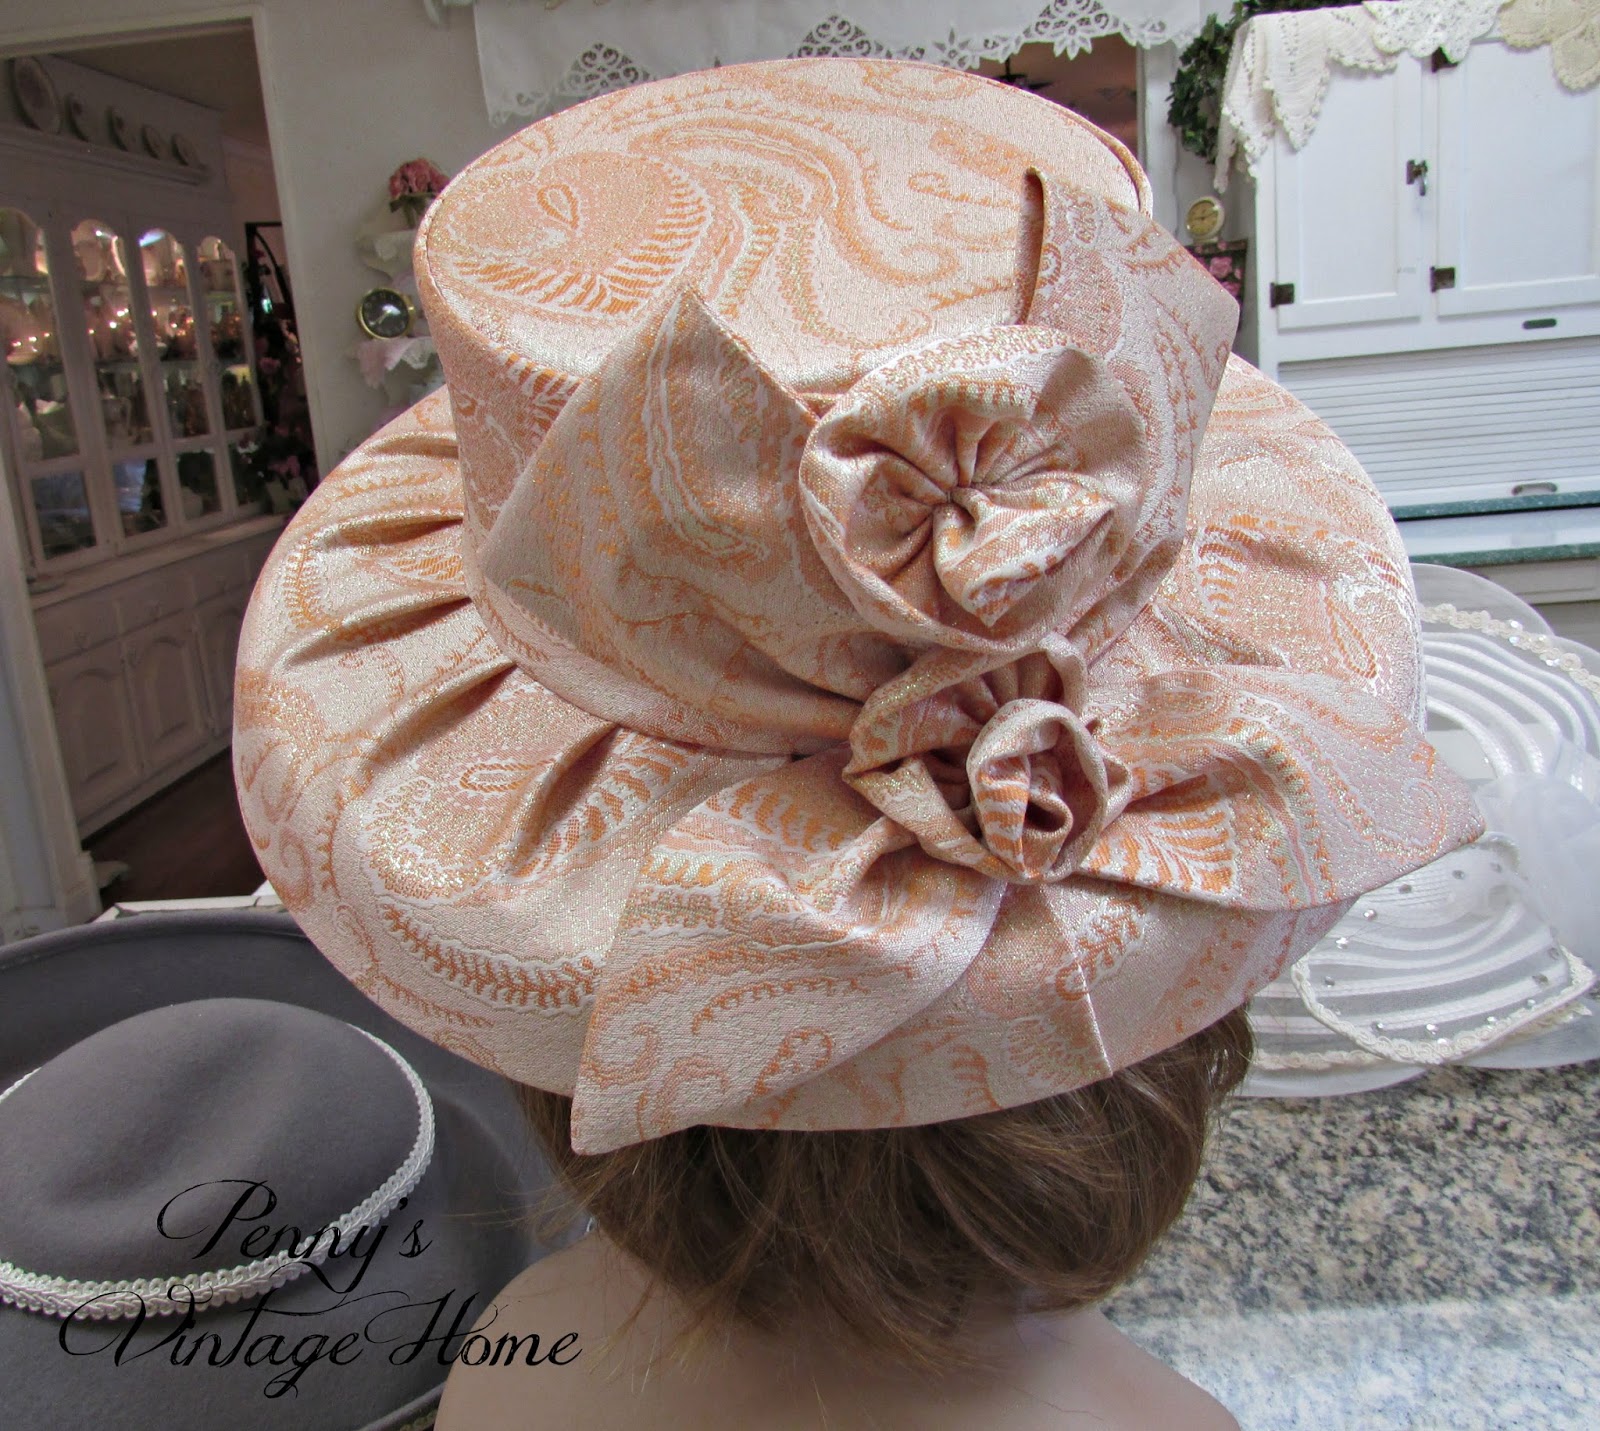 Penny's Vintage Home: Downton Abbey Style Hats